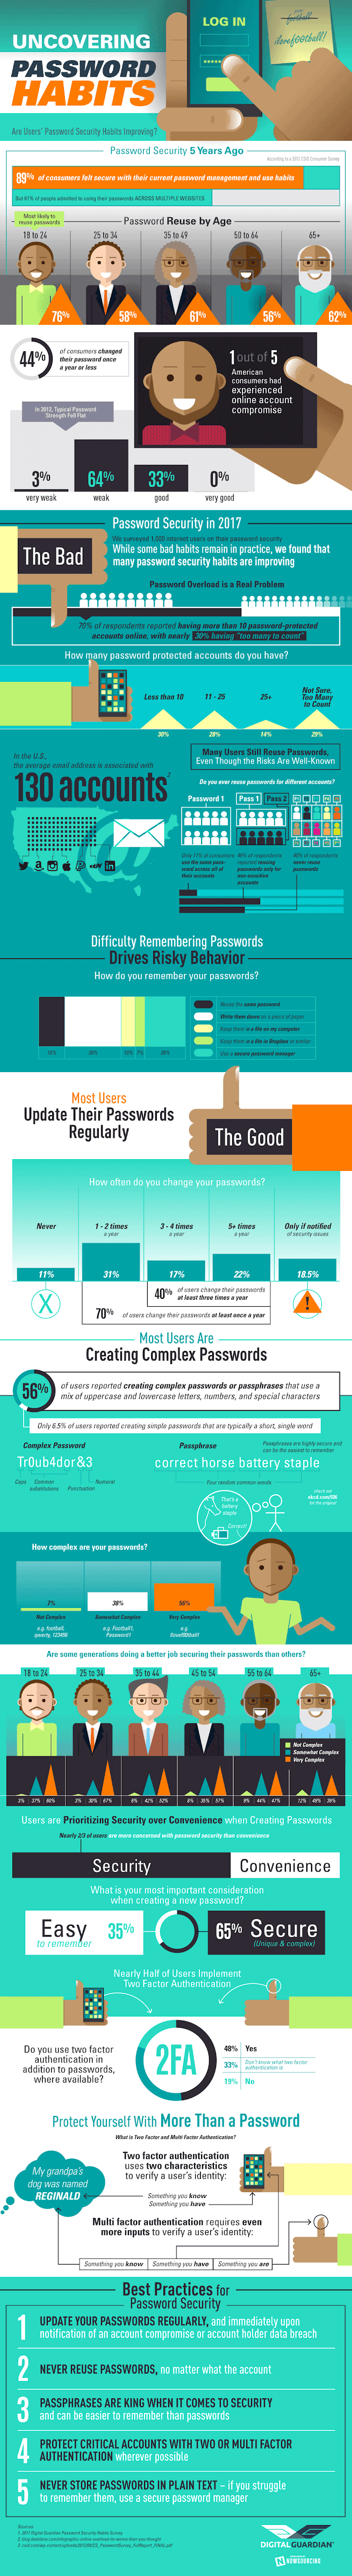 Uncovering Password Habits: Are Users’ Password Security Habits Improving? #infographic